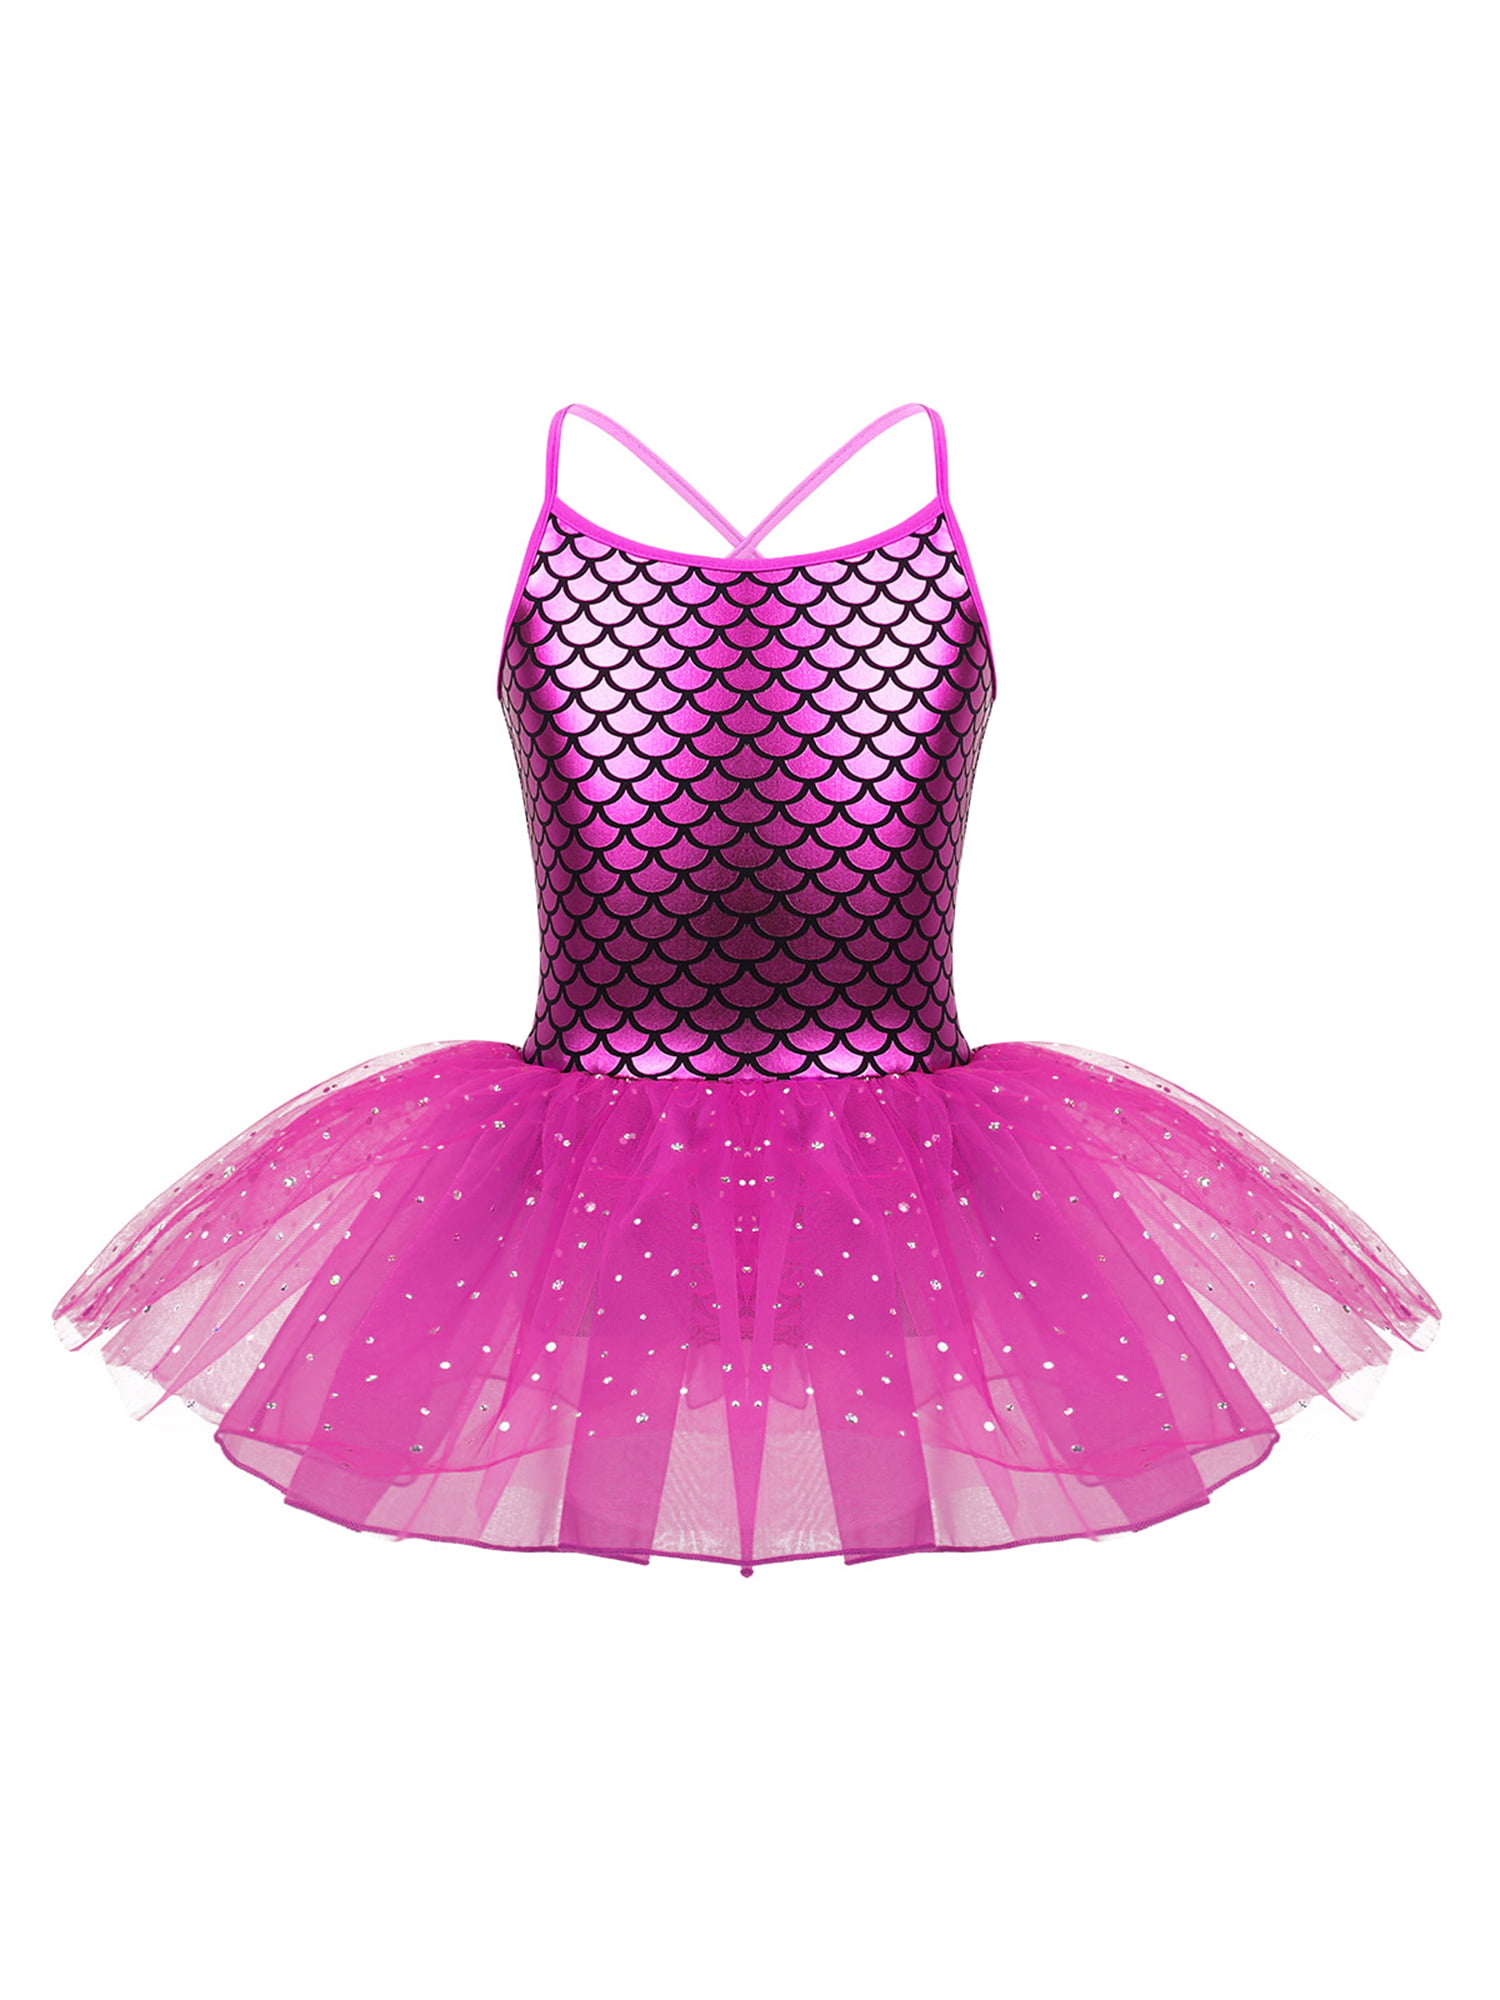 PROM QUEEN Ballet Jazz Tap Dance Costume Tutu 4 Colors Child & Adult Size GROUPS 